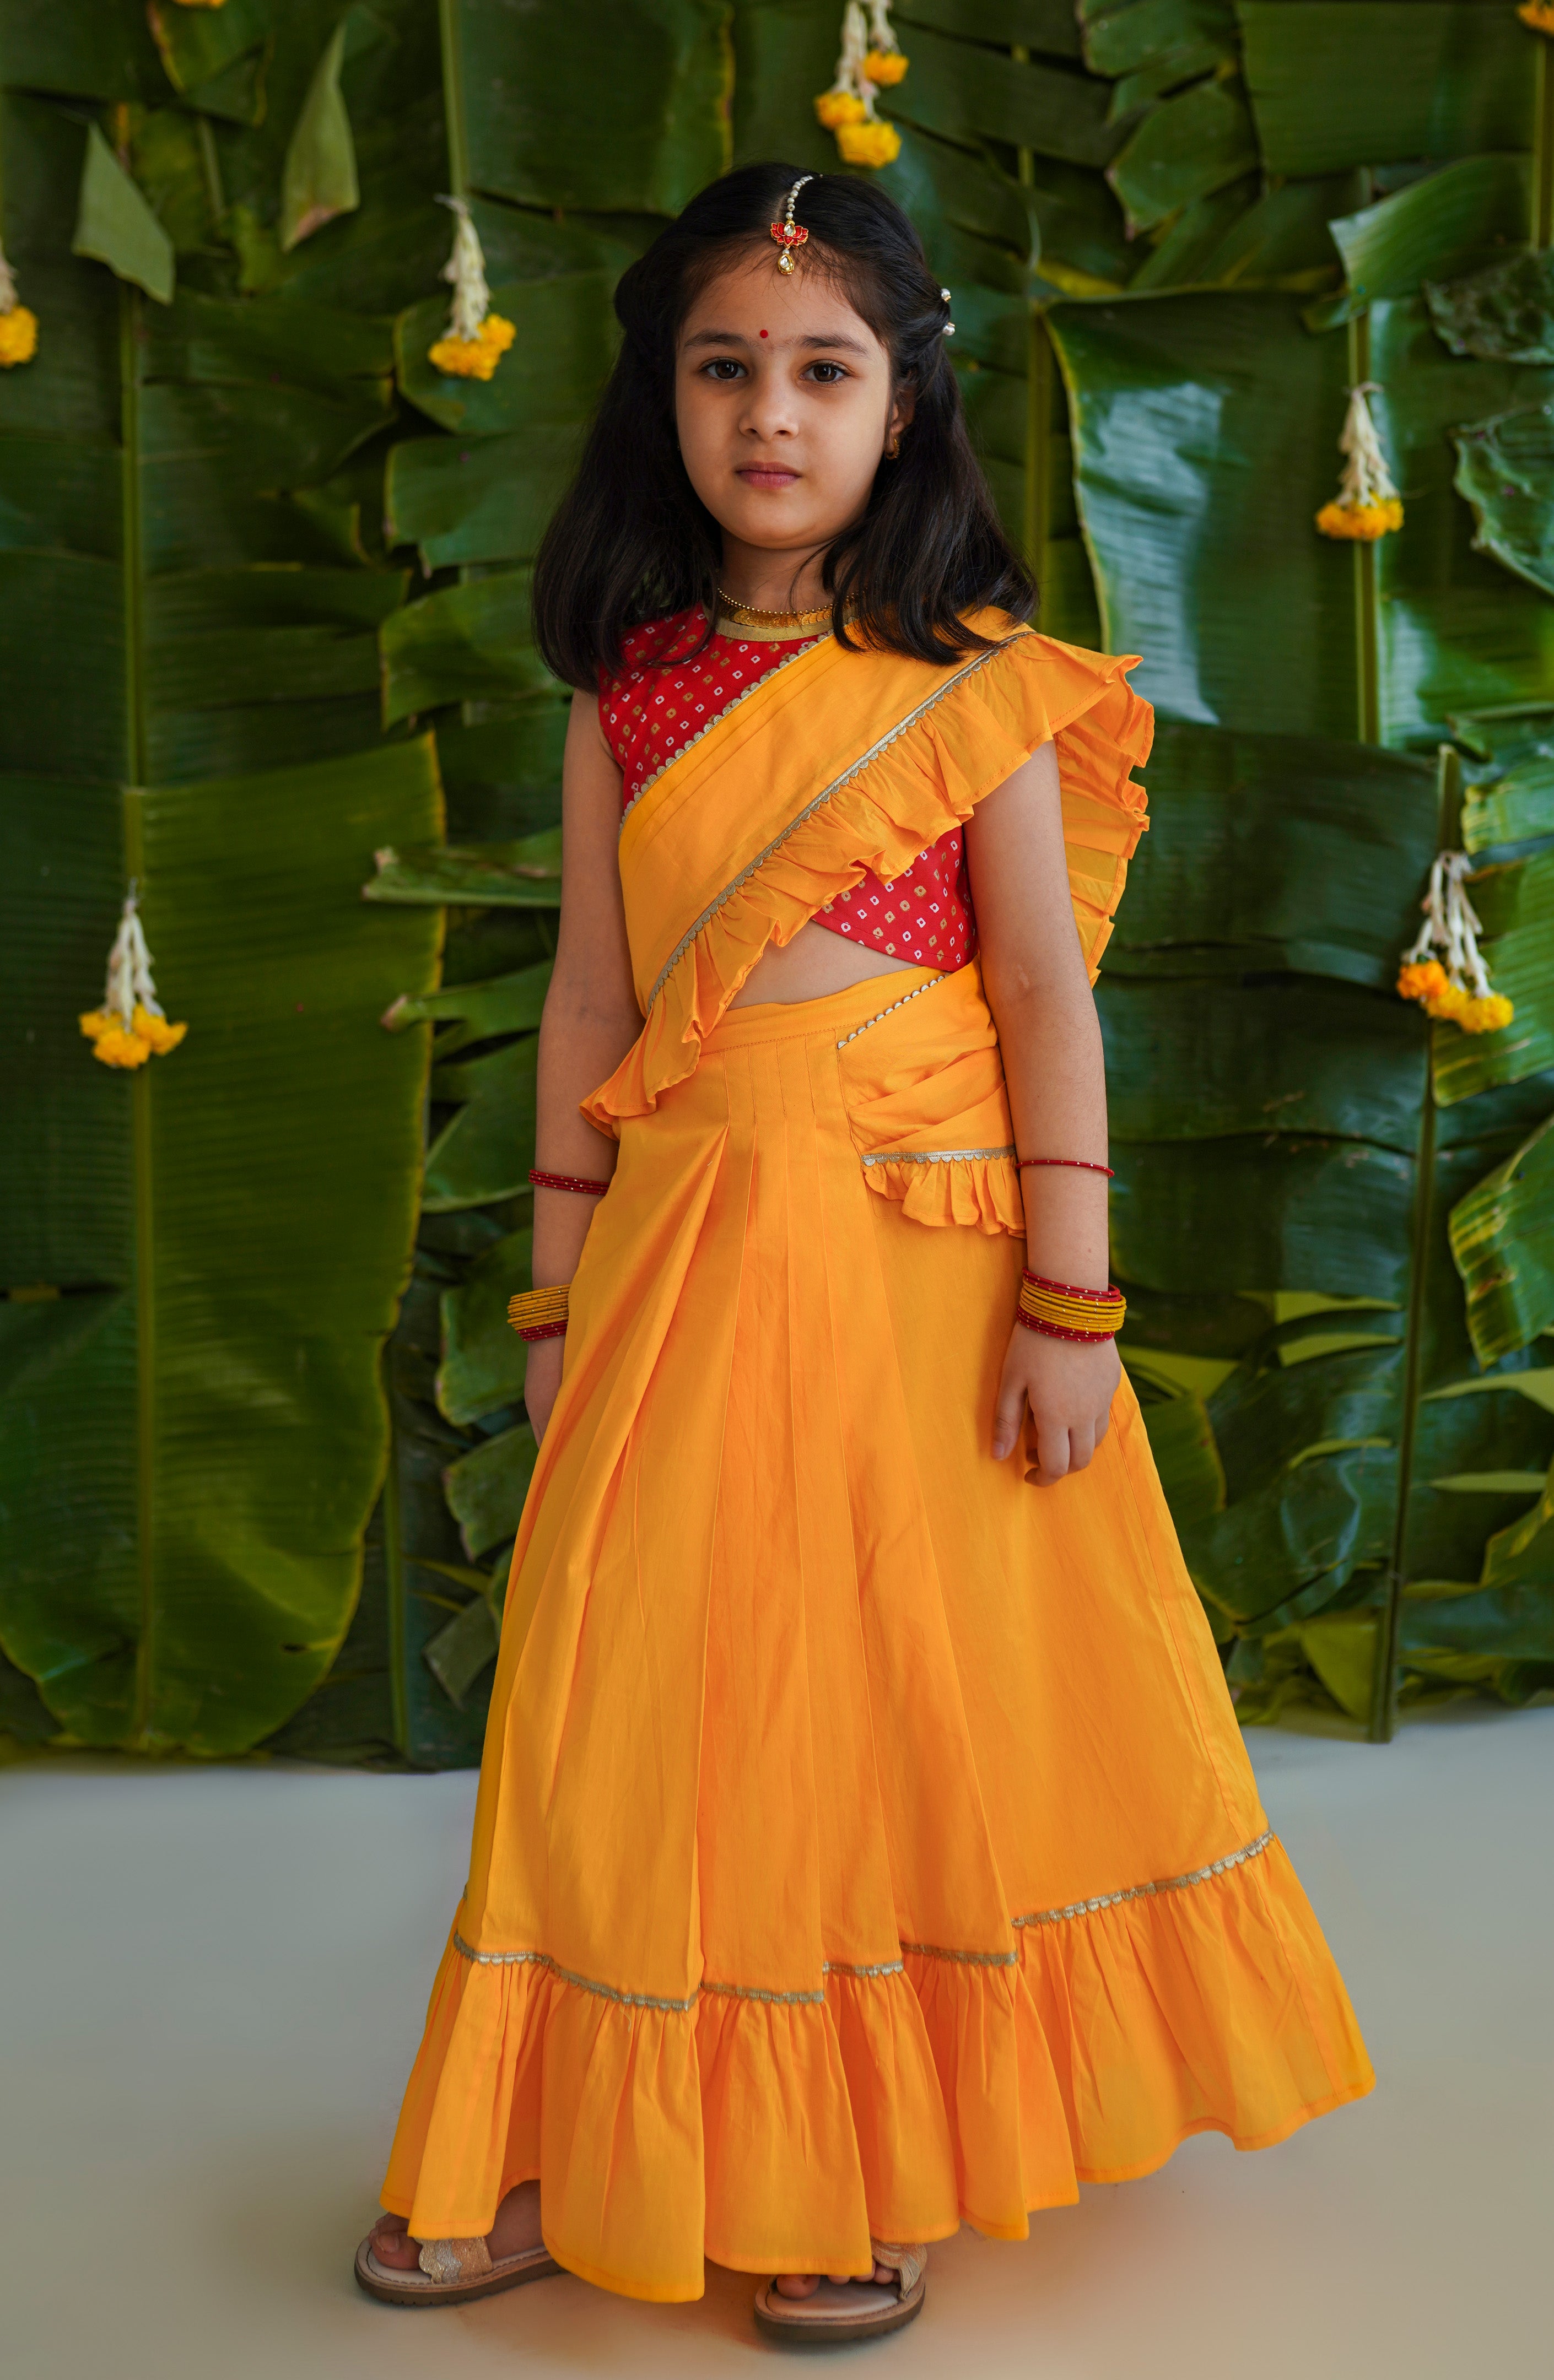 South Indian Costume For Girl - Buy Now | ItsMyCostume